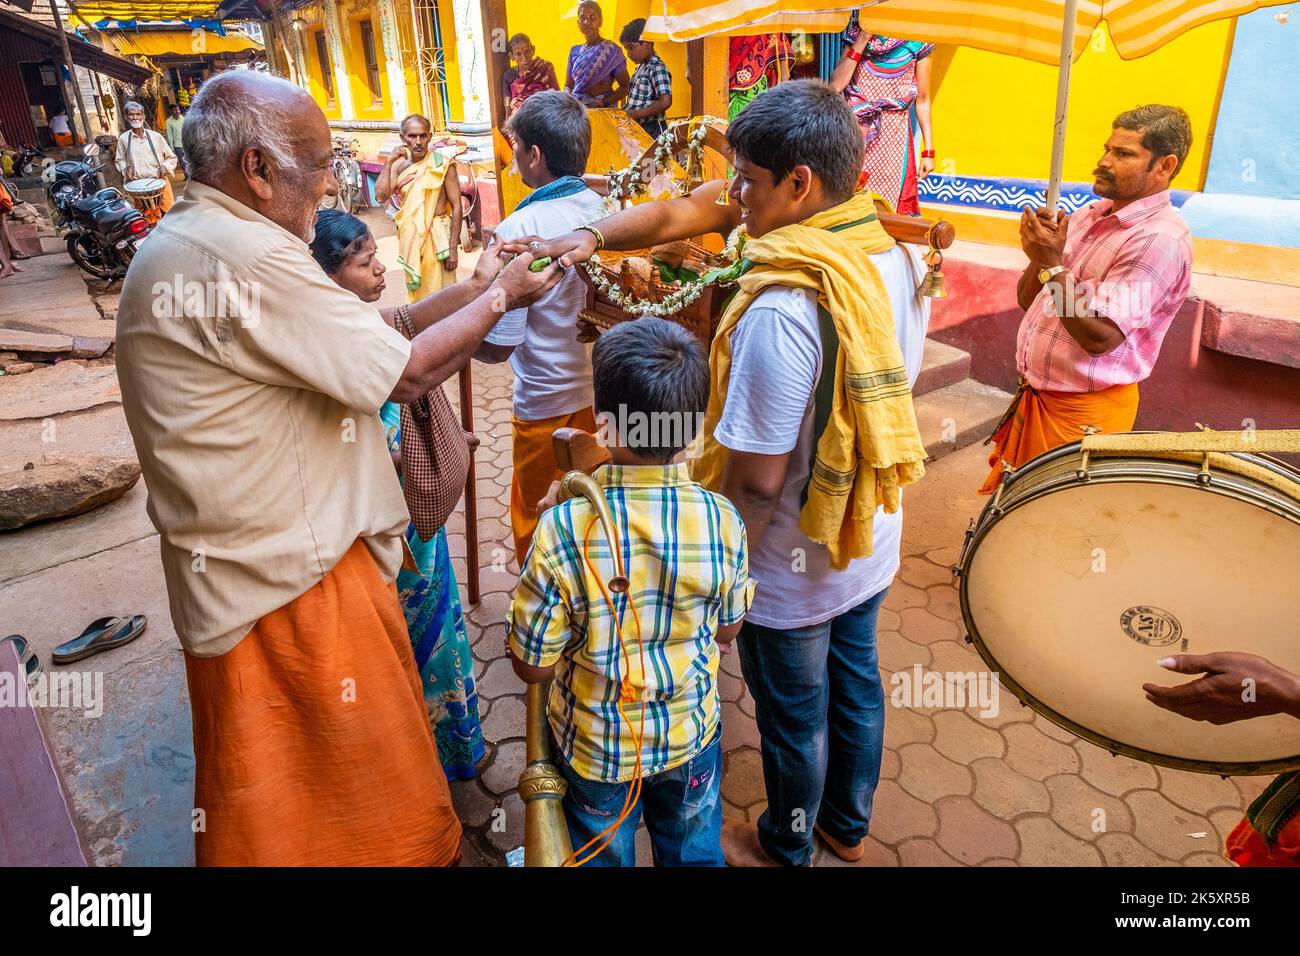 Street scenes in a small rural Indian town Stock Photo